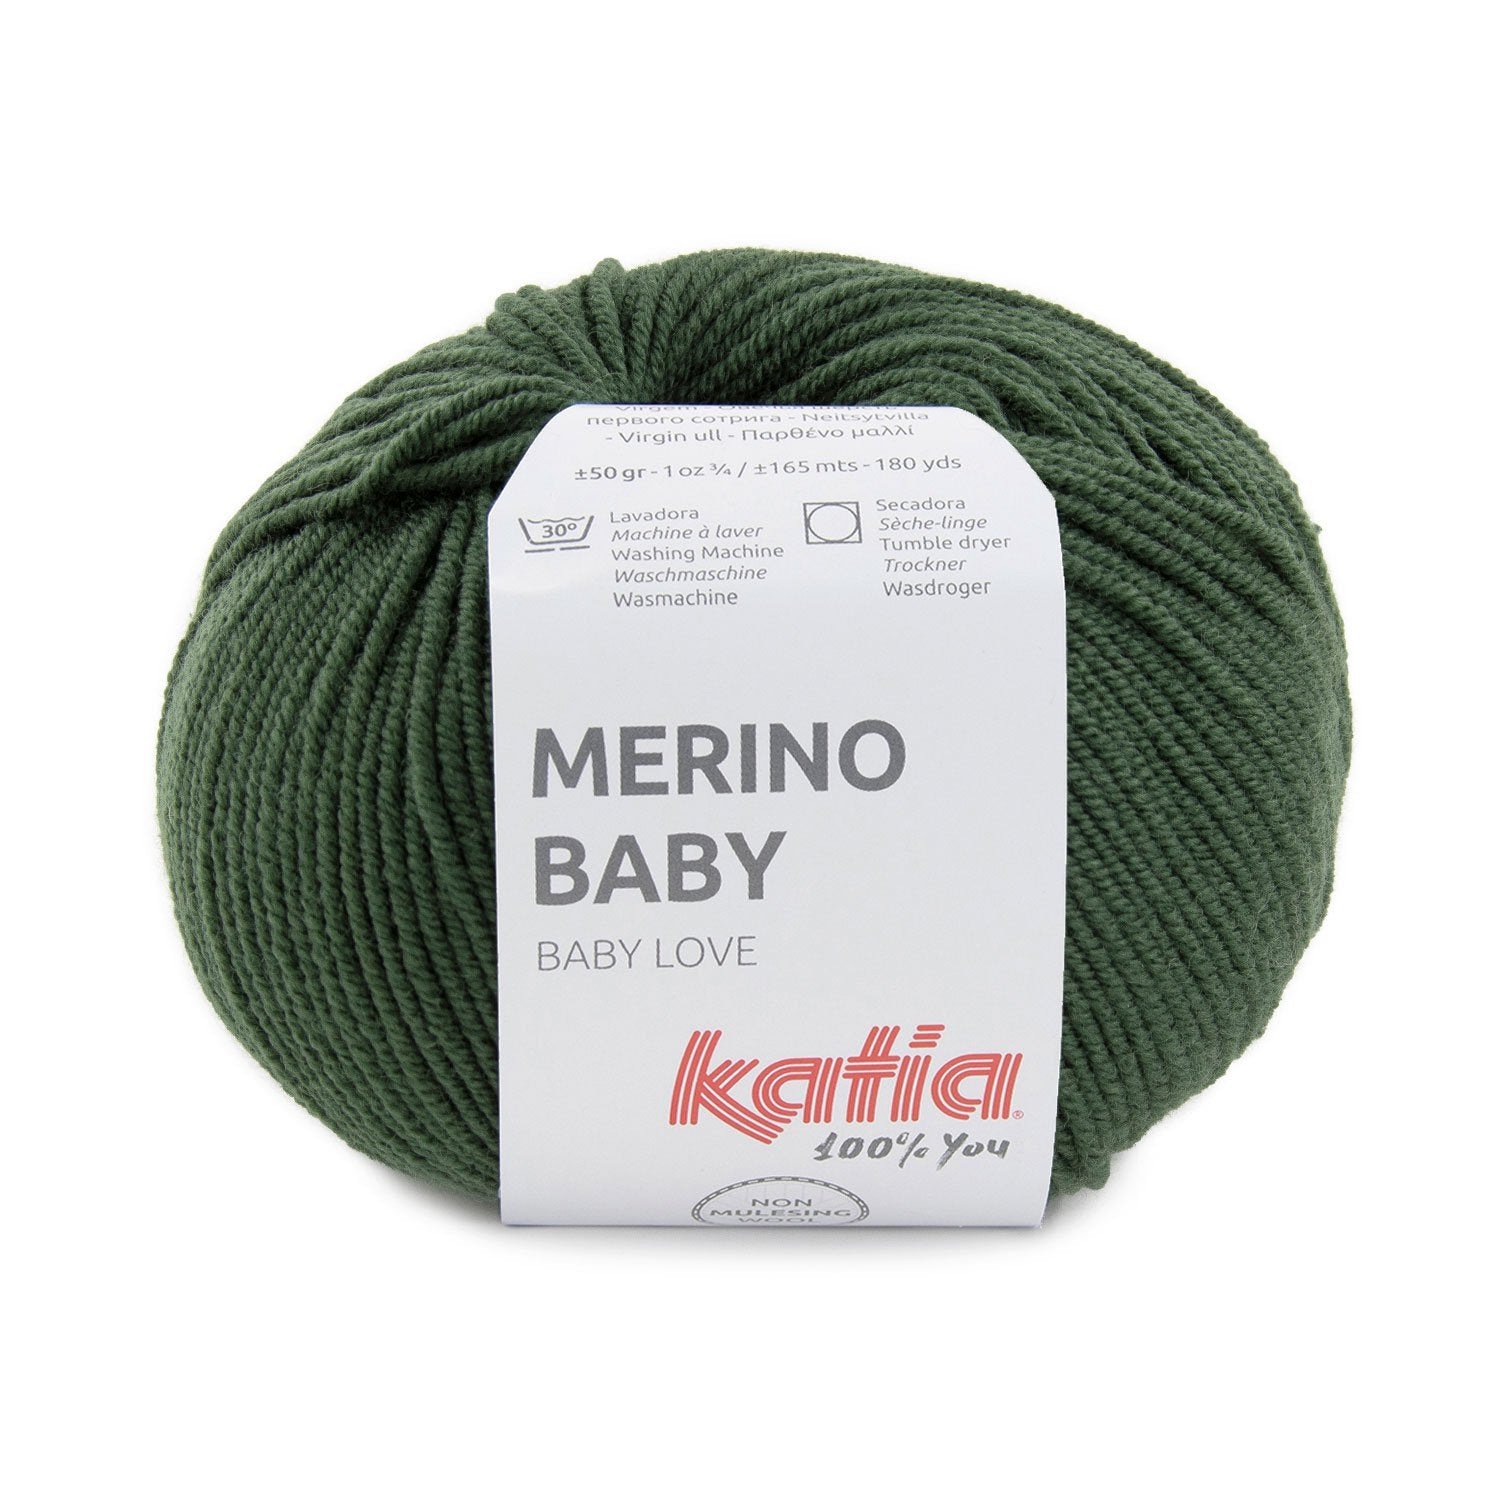 Katia Merino Baby - Soft wool for delicate skin of babies and children